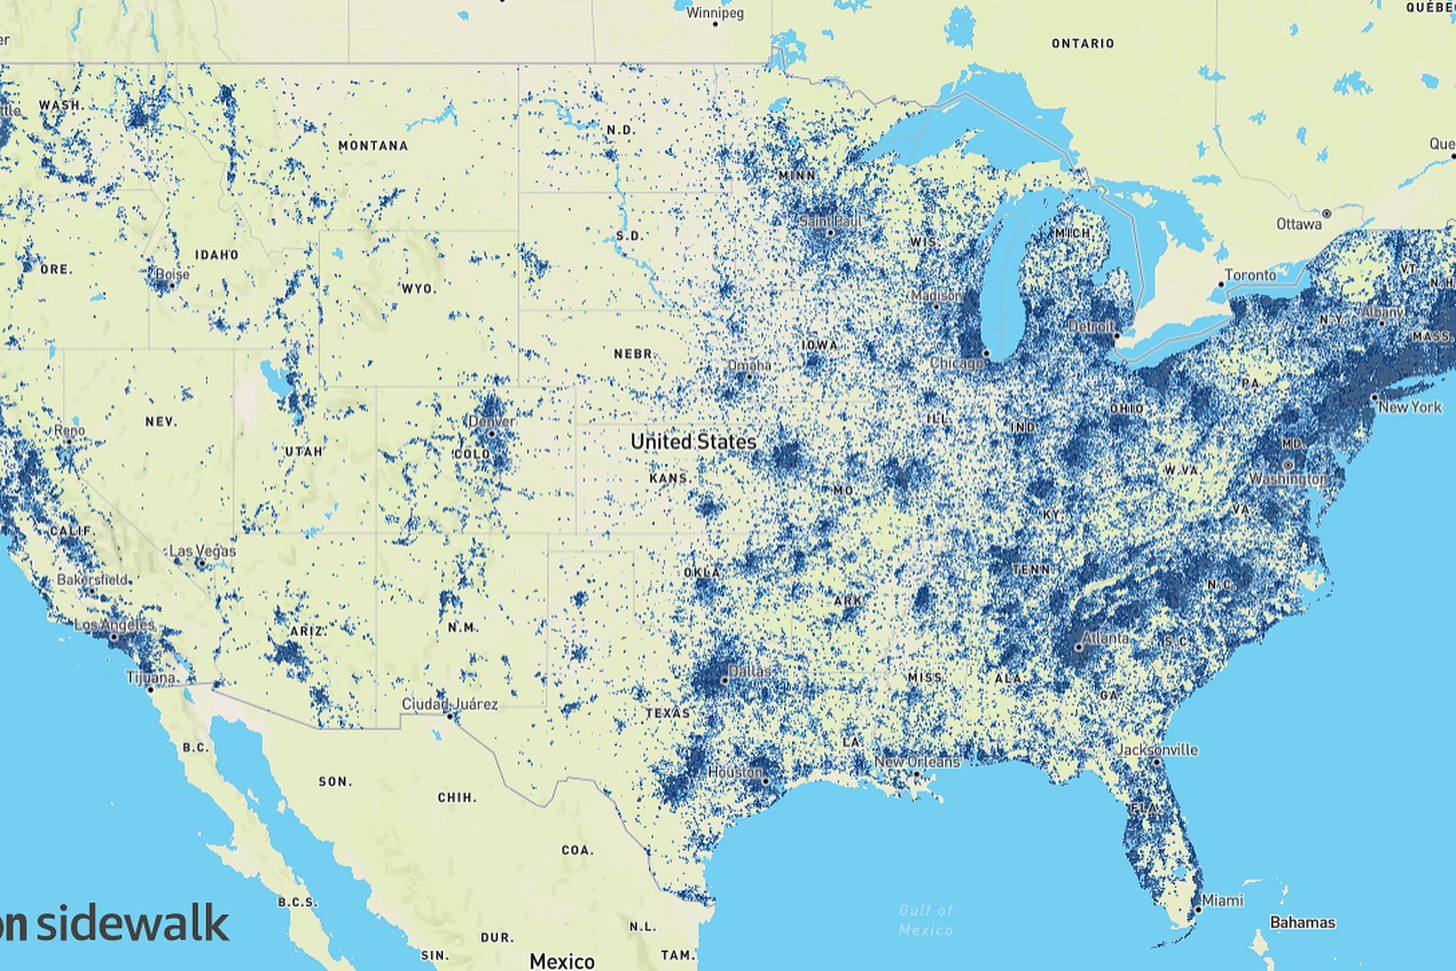 A Sidewalk coverage map claims the network reaches over 90 percent of the US population.